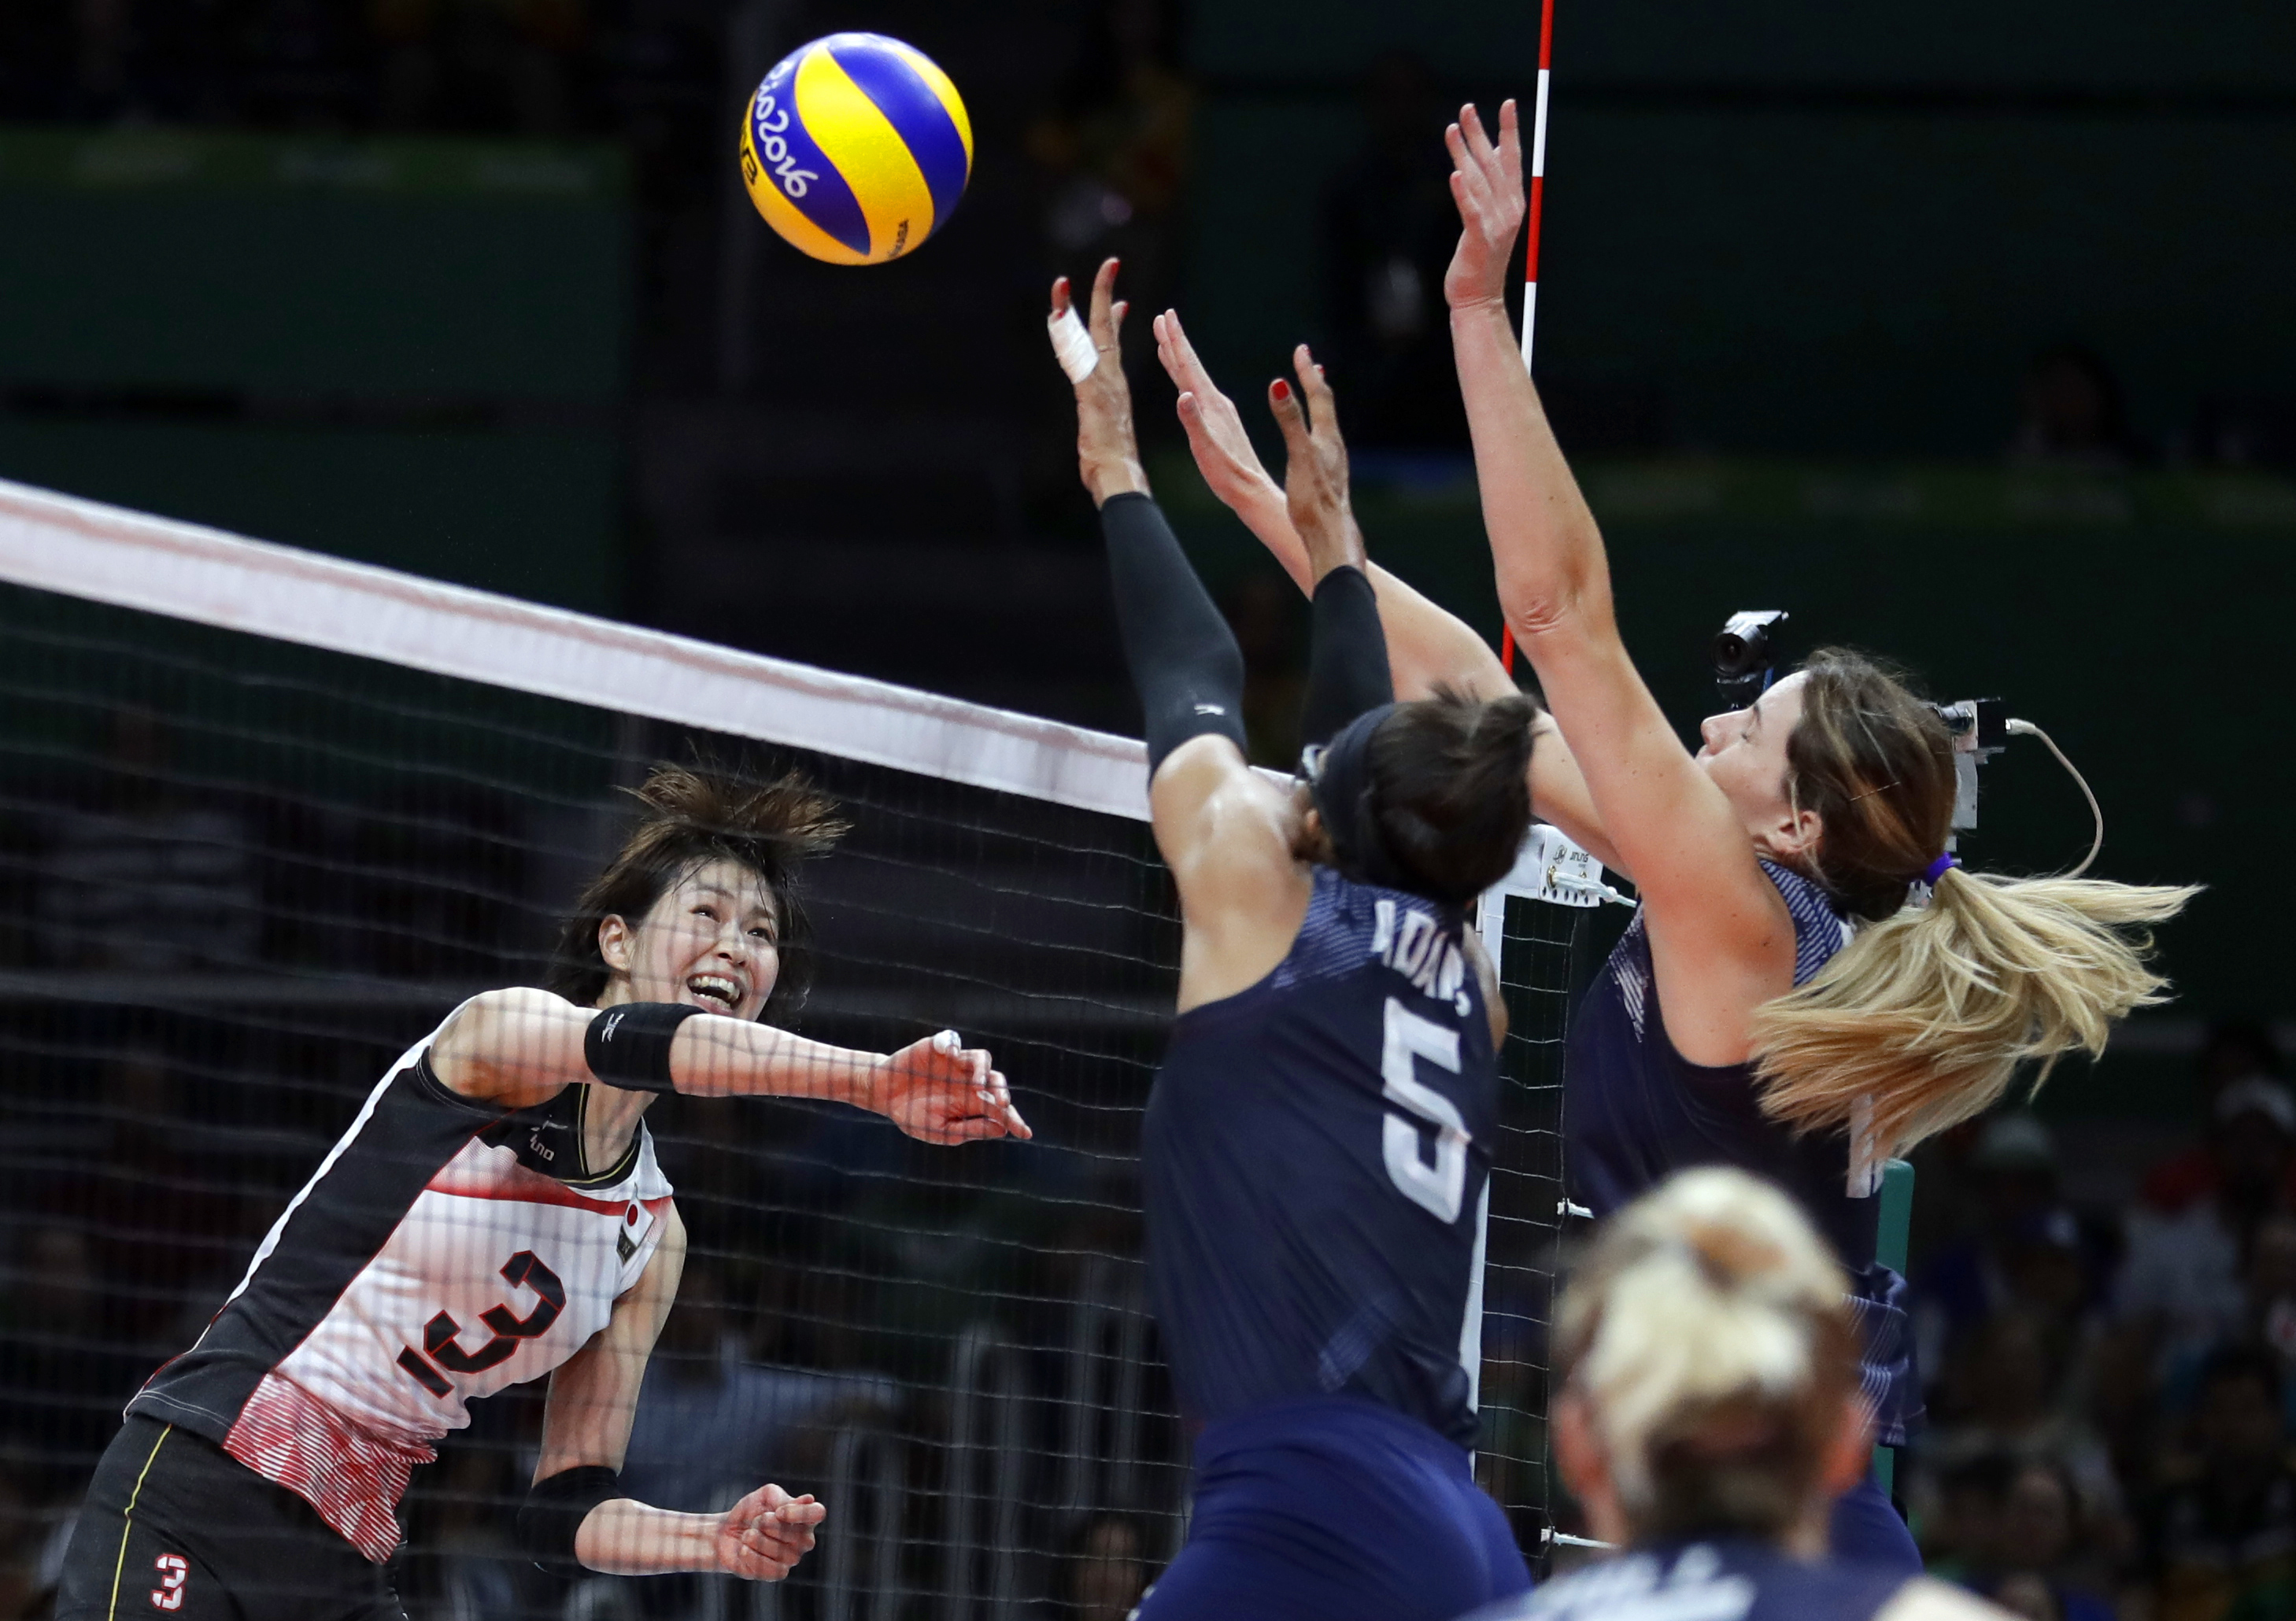 US volleyball player Rachael Adams persevered on road to Rio - Sports ...